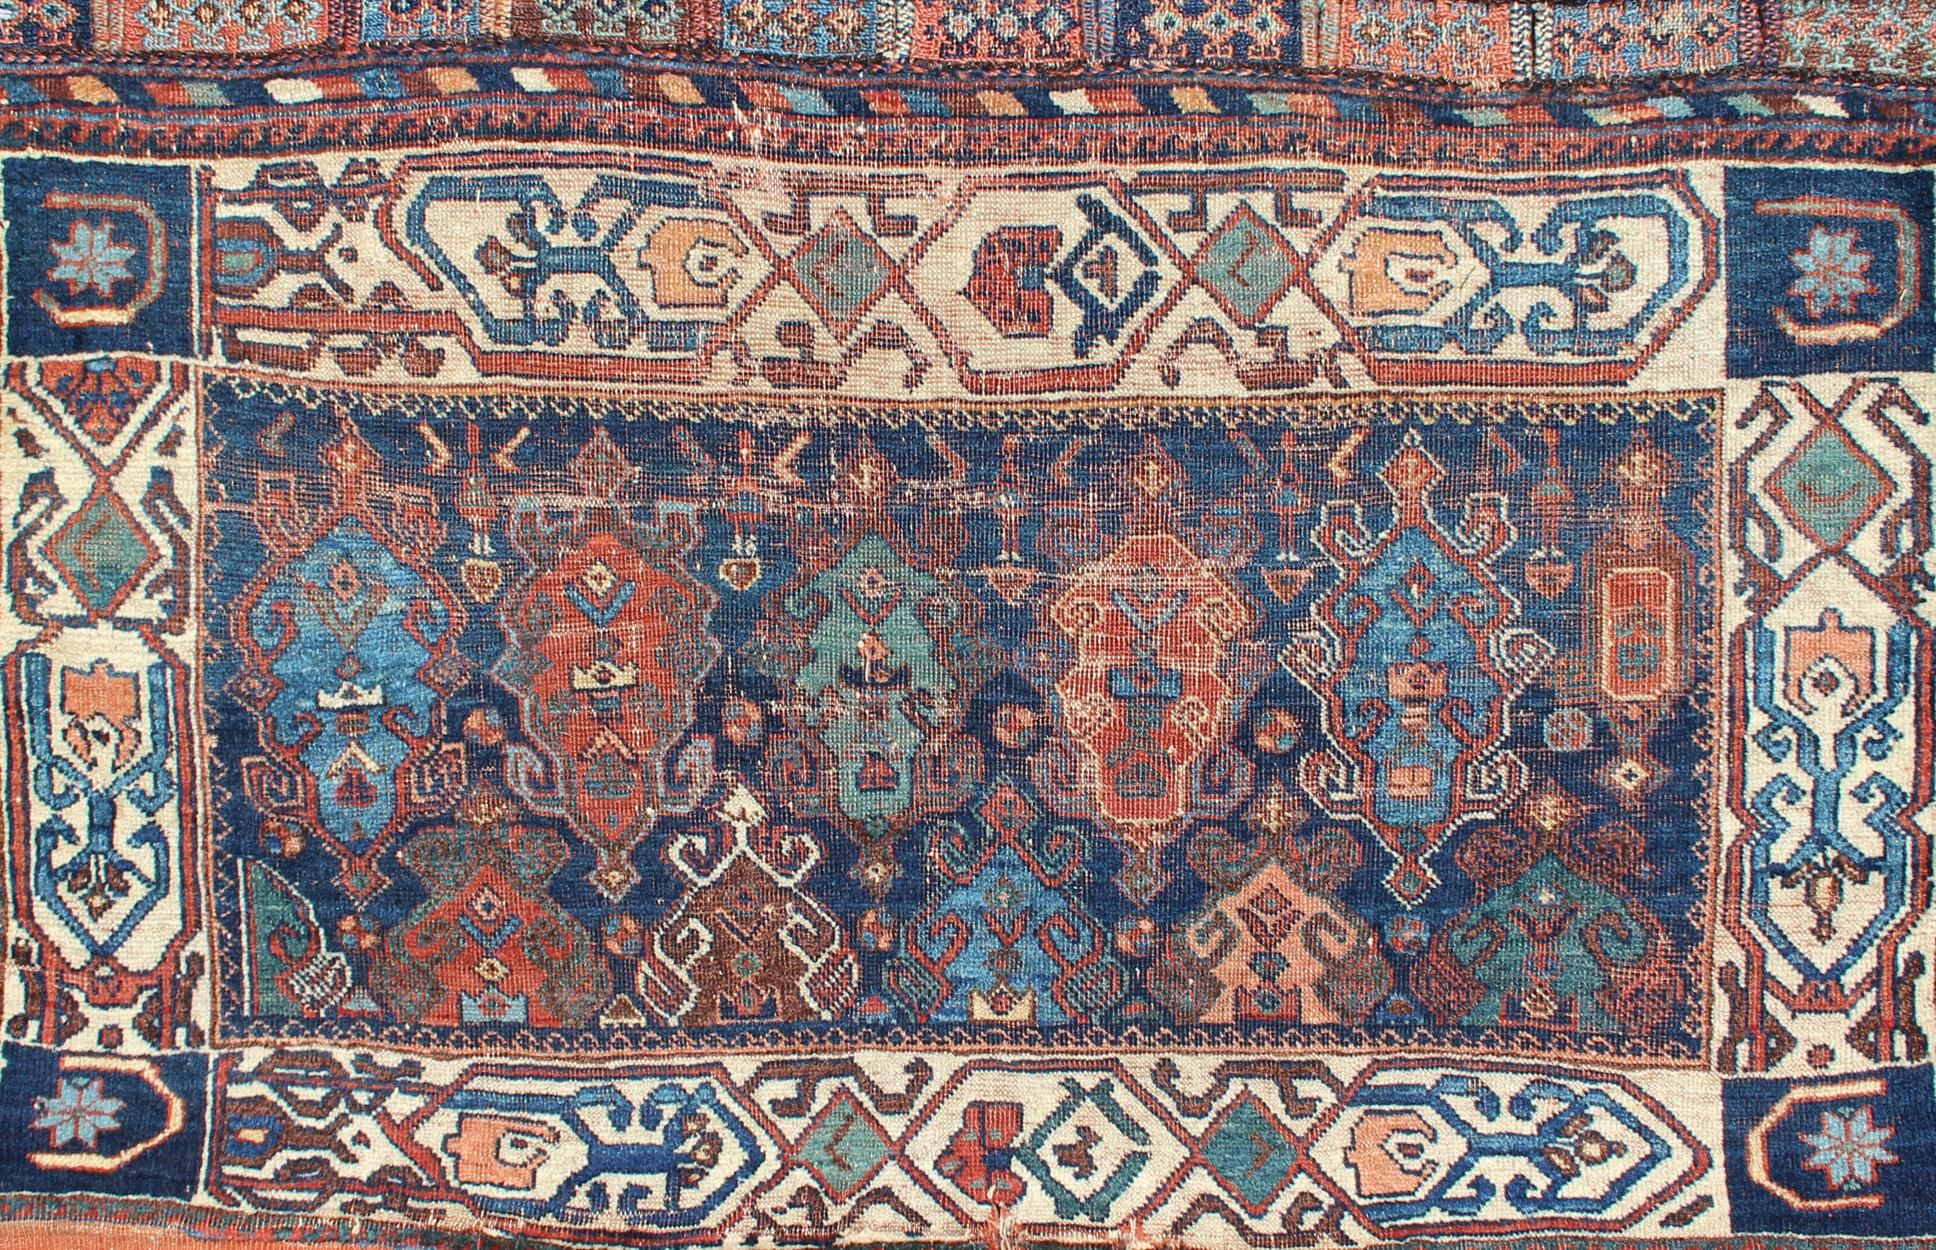 Antique Persian Qashqai rug with medallion design in blue, orange, mint green, and cream, rug 18-1006, country of origin / type: Iran / Qashqai, circa 1880

The Qashgai nomads are found in the Fars province in southwest Iran. They move twice a